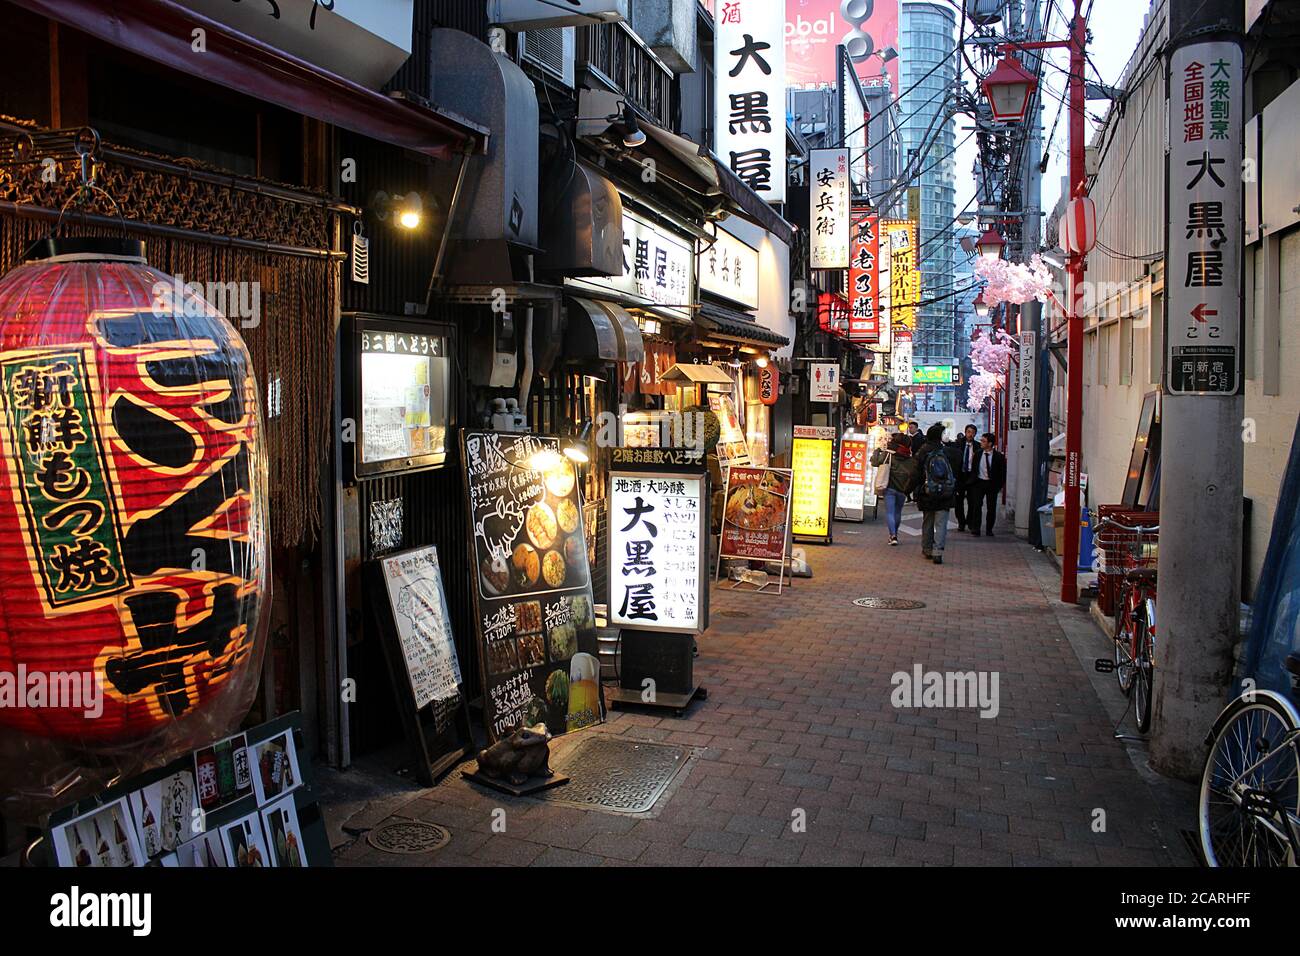 Tokyo, Japan - 13 March 2018: Illuminated alleyway with bars and izakayas (pub for after-work drinking) in the evening with few people walking by. Stock Photo